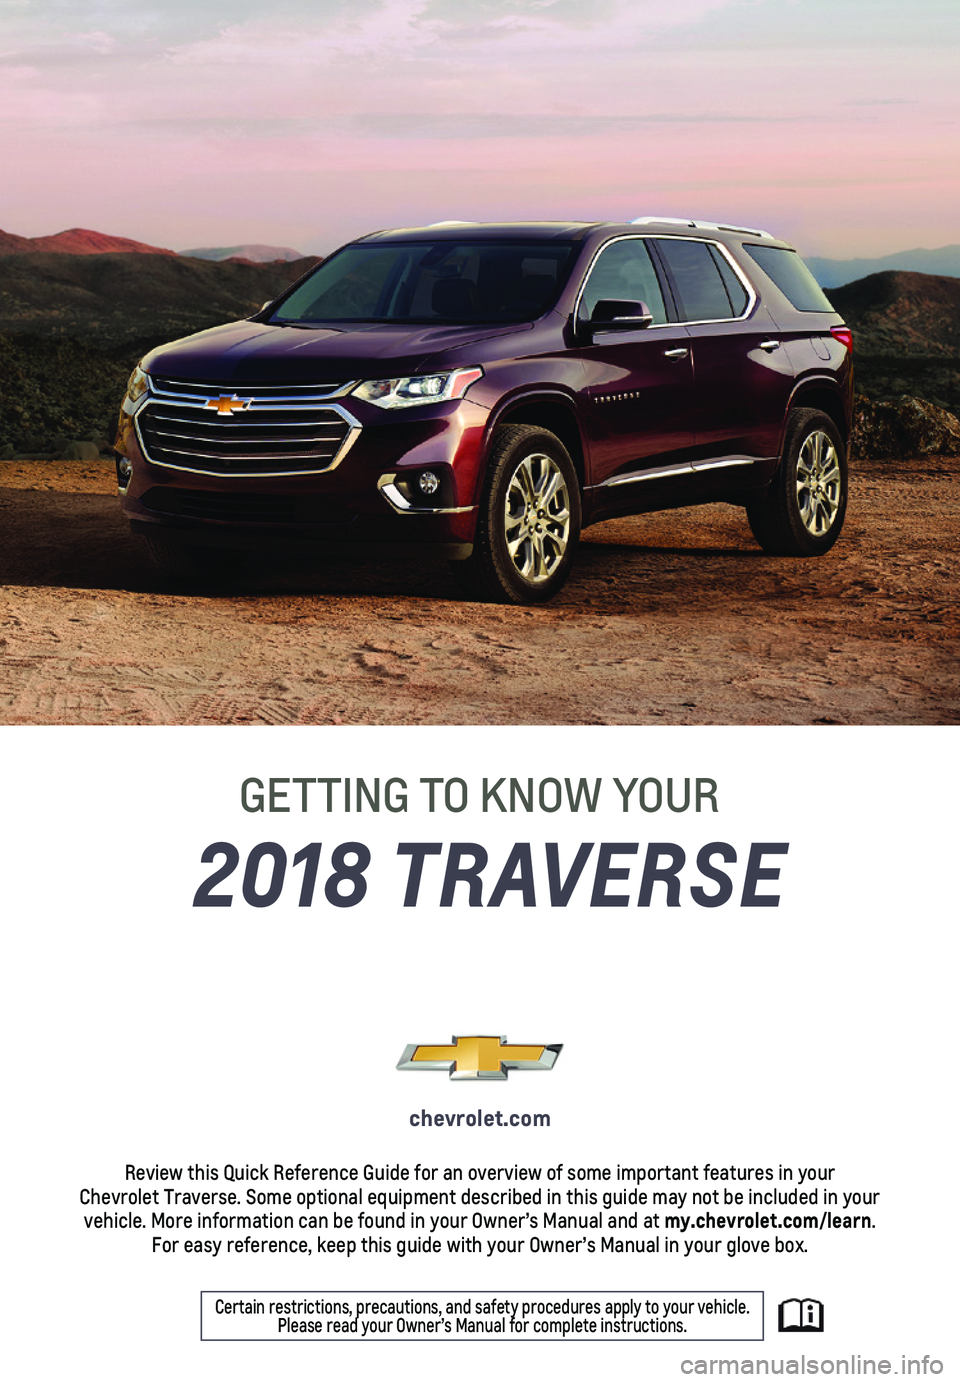 CHEVROLET TRAVERSE 2018  Get To Know Guide 1
2018 TRAVERSE
GETTING TO KNOW YOUR
chevrolet.com
Review this Quick Reference Guide for an overview of some important feat\
ures in your  Chevrolet Traverse. Some optional equipment described in this